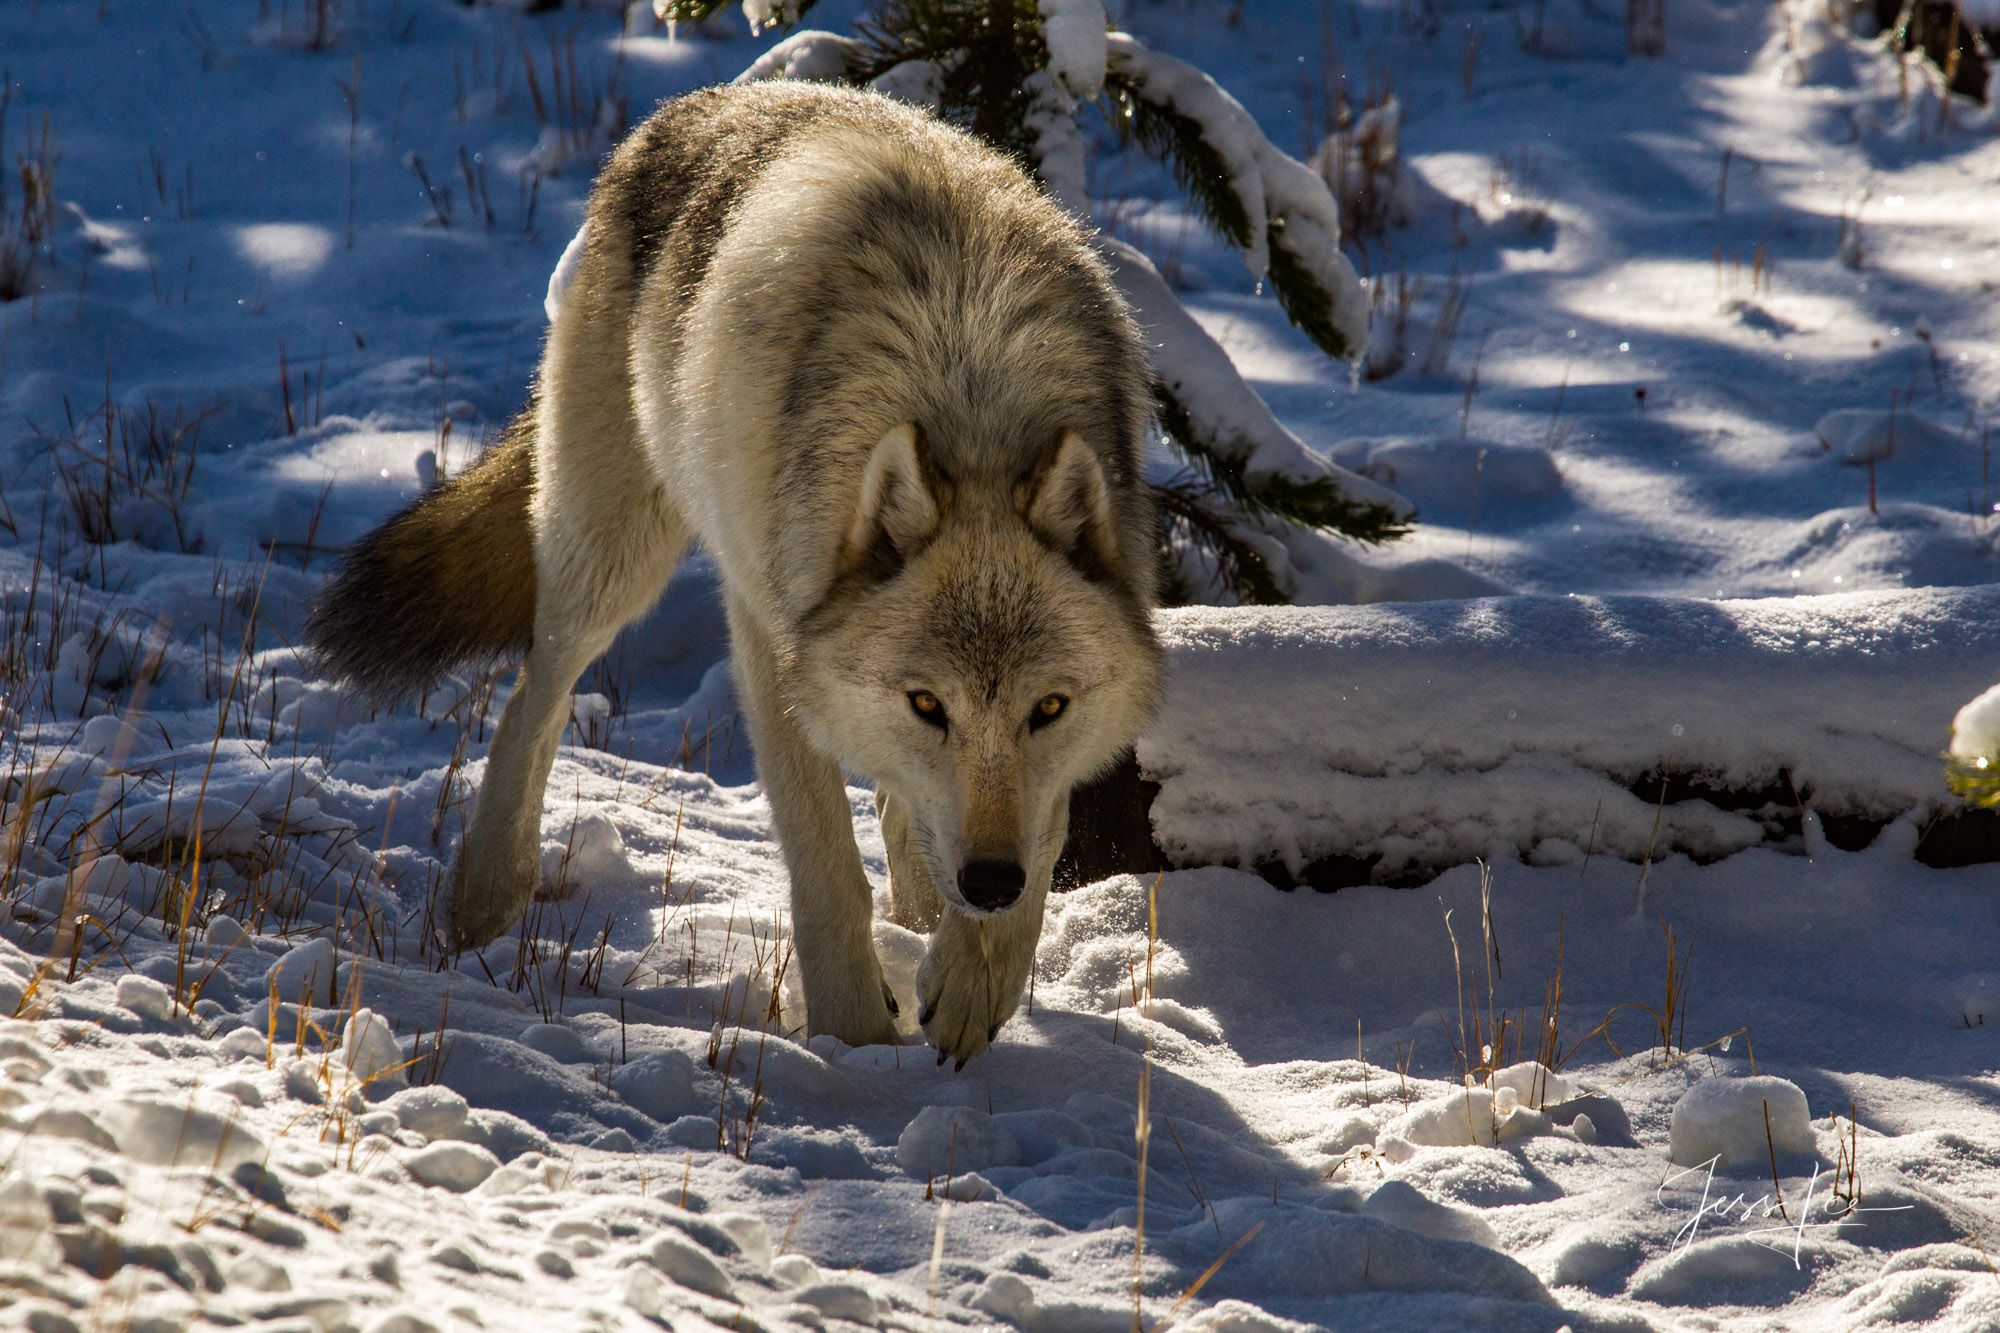 Yellowstone The Wolf in the Wild. Exclusive limited edition photo of 200 prints by Jess Lee